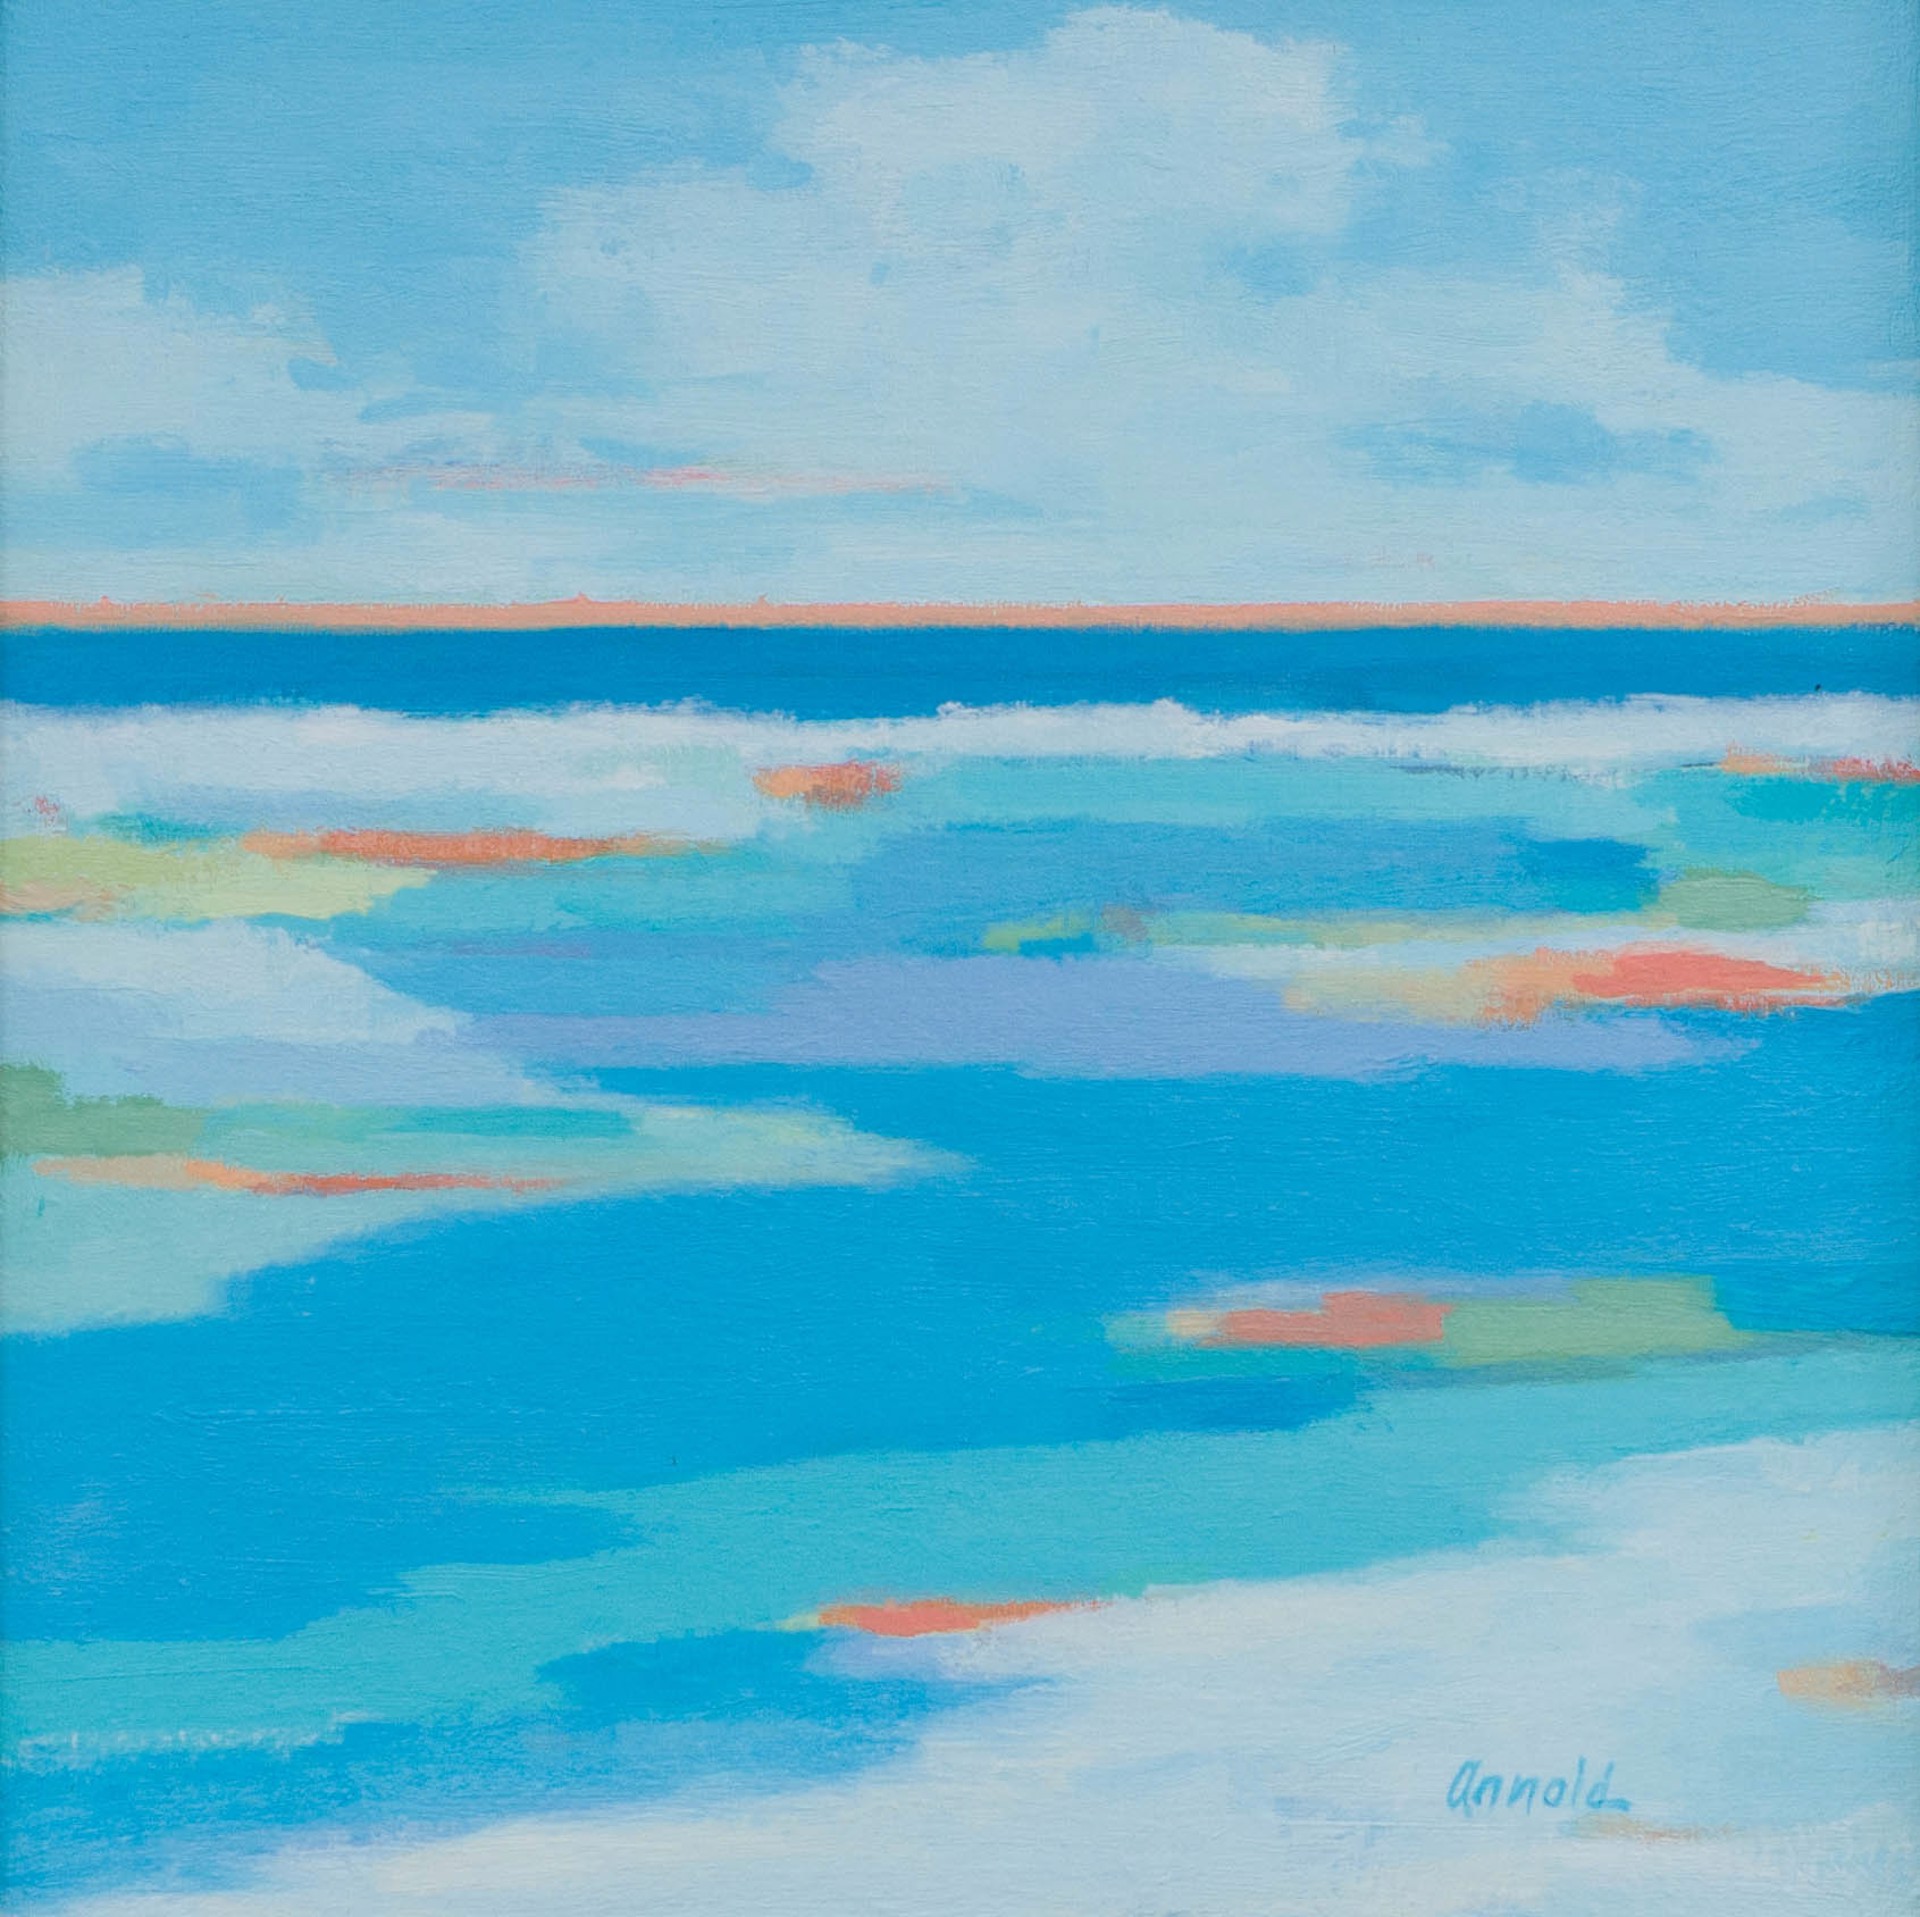 Approaching the Sea by Linda Arnold